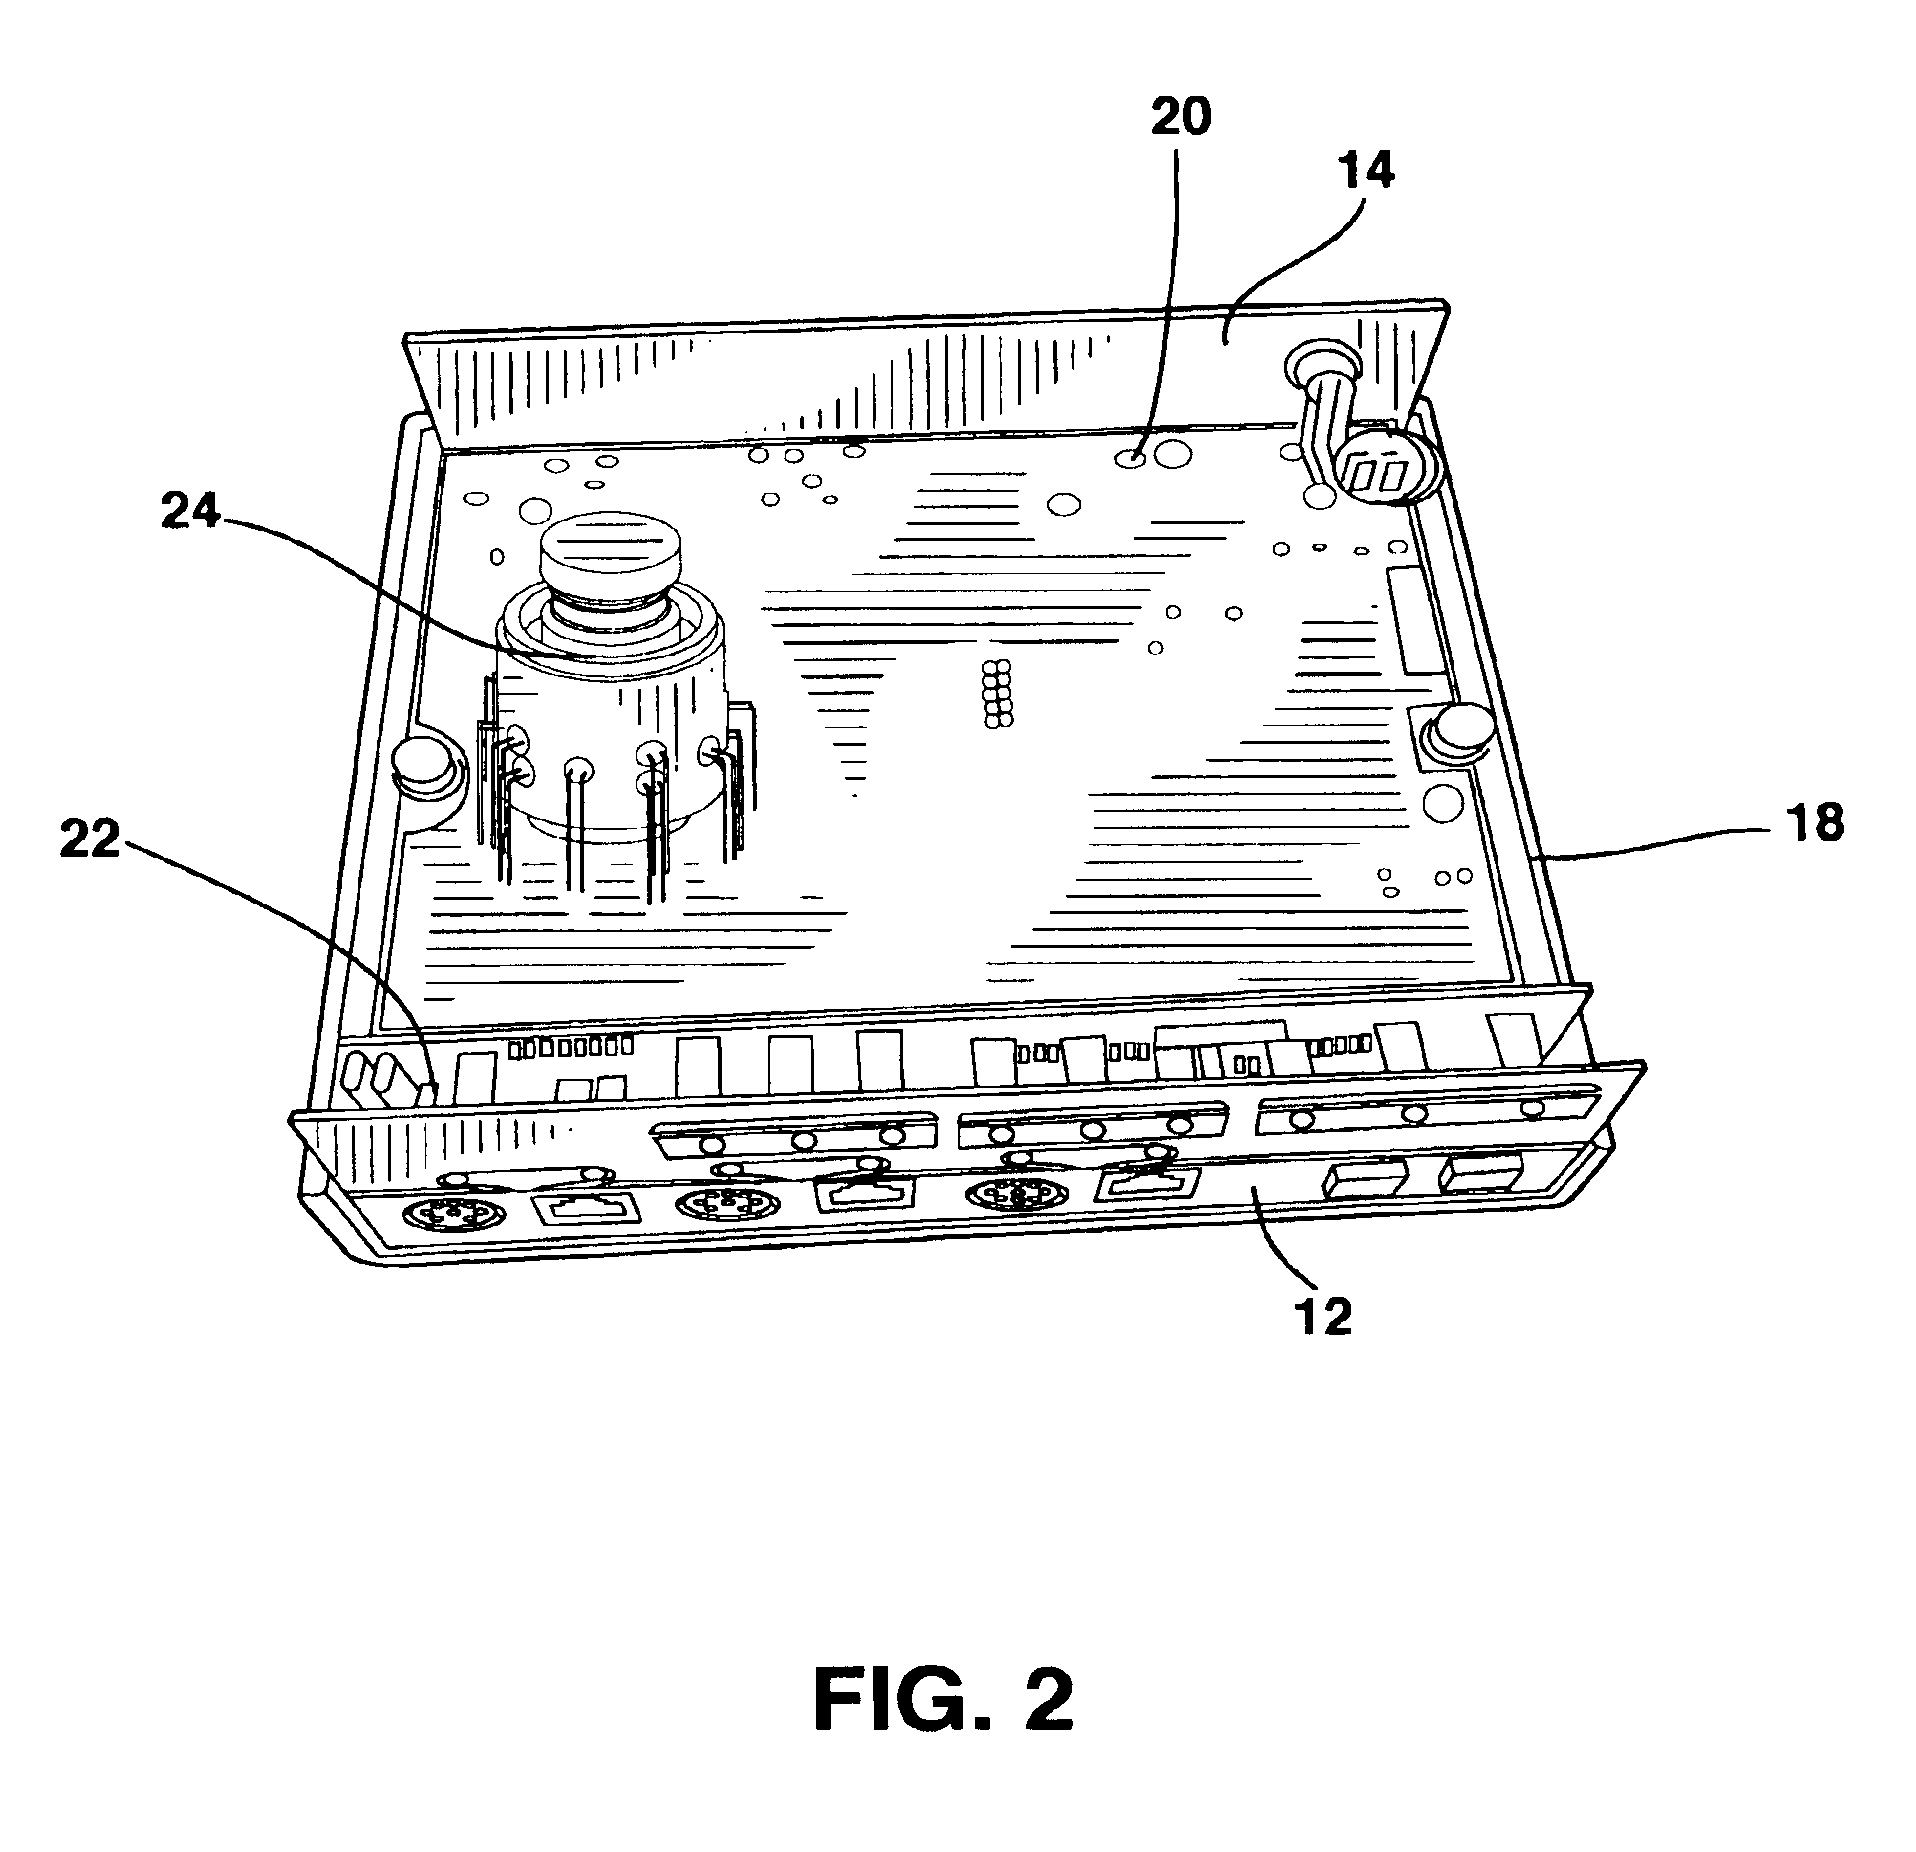 Instrument with colorimeter and sensor inputs for interfacing with a computer